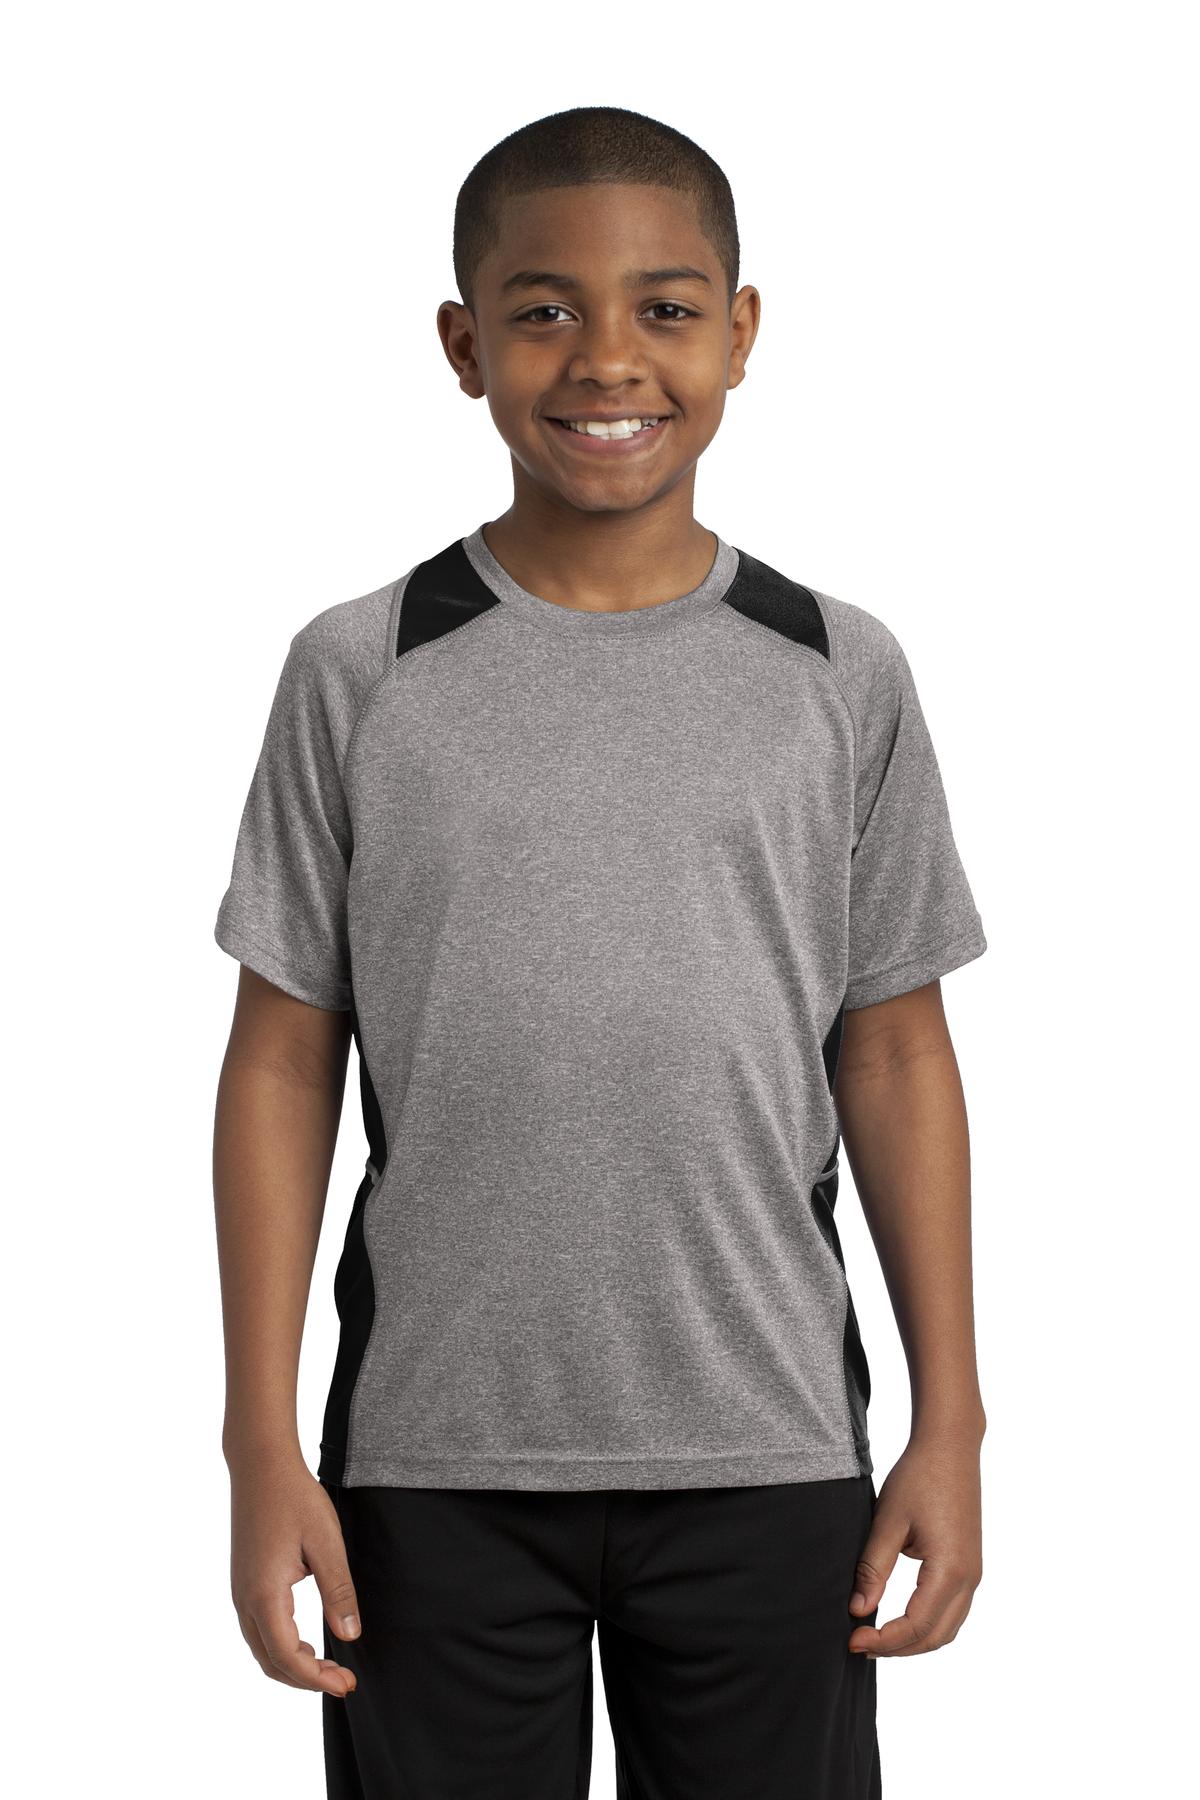 Sport-Tek Activewear Youth T-Shirts for Hospitality ® Youth Heather Colorblock Contender Tee.-Sport-Tek